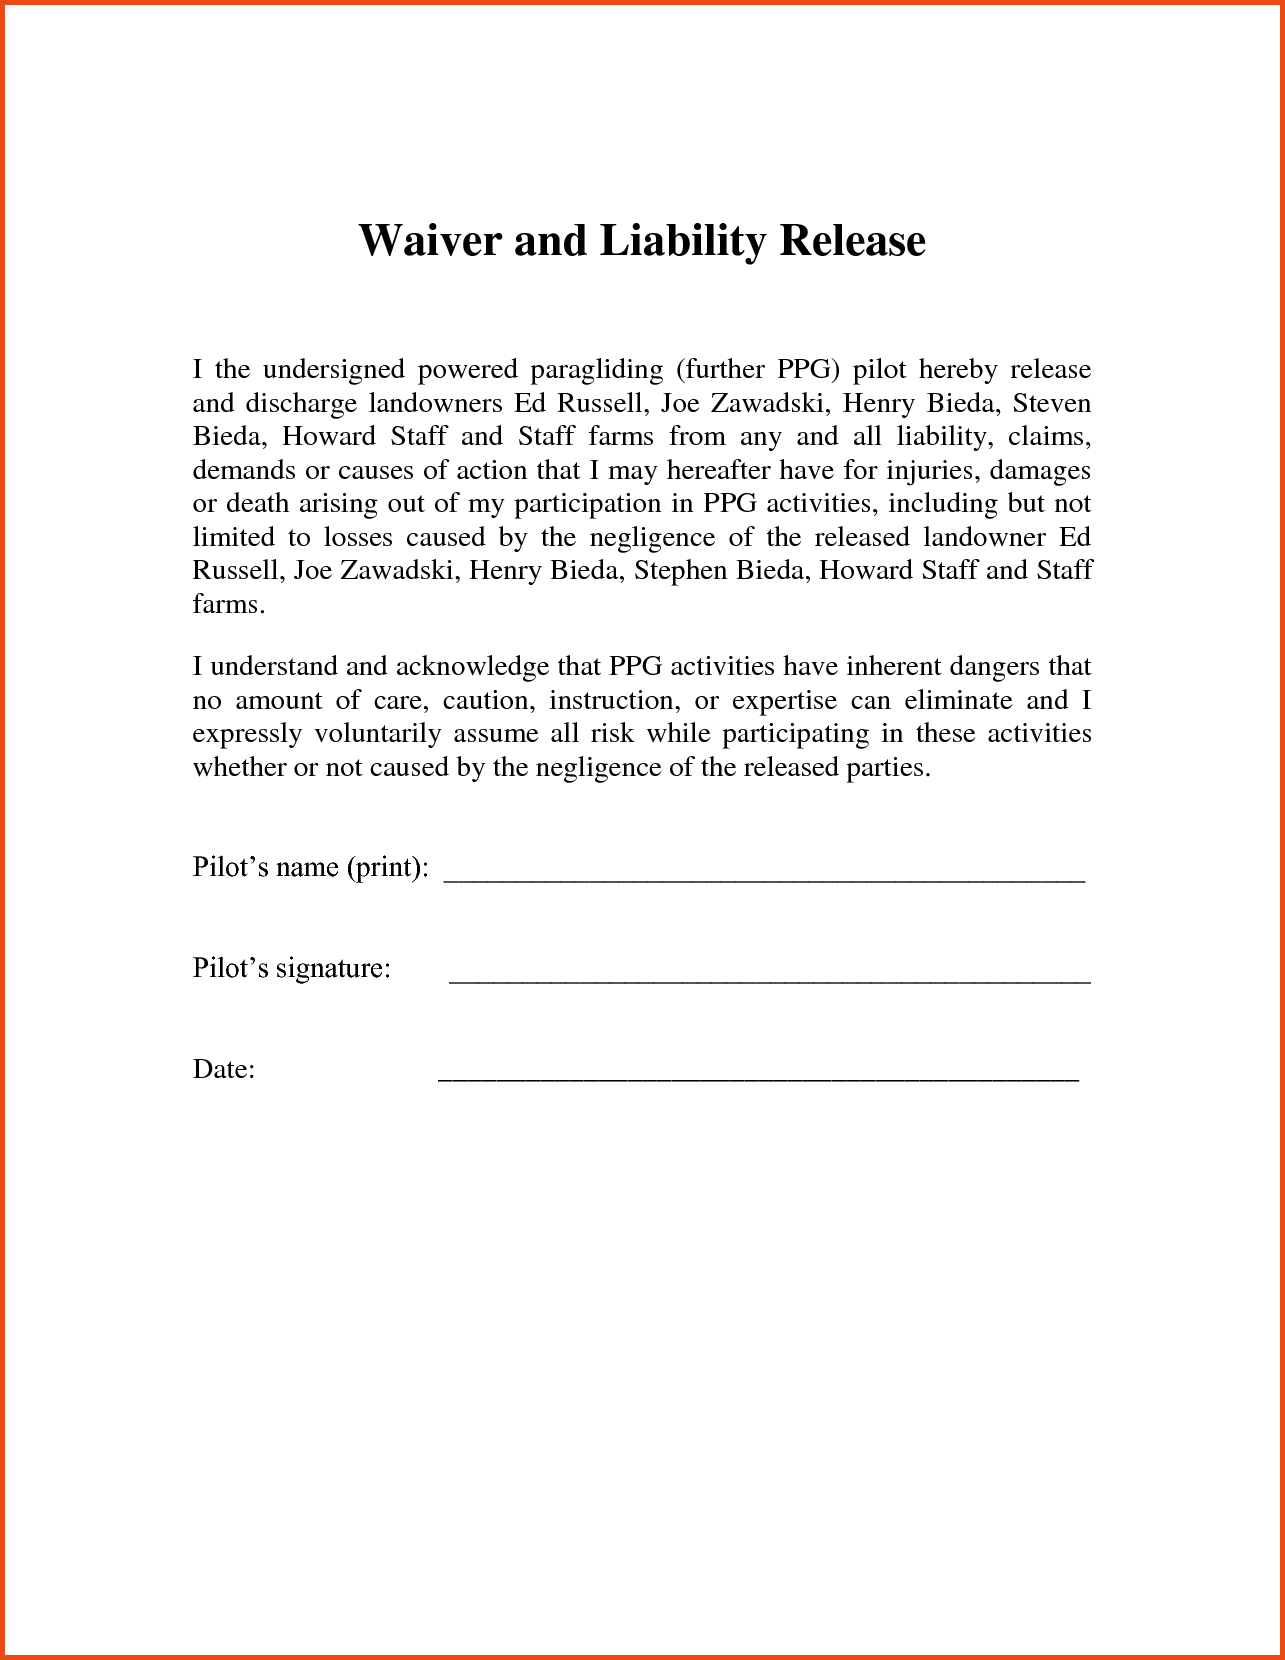 Humana Waiver Of Liability Statement Form